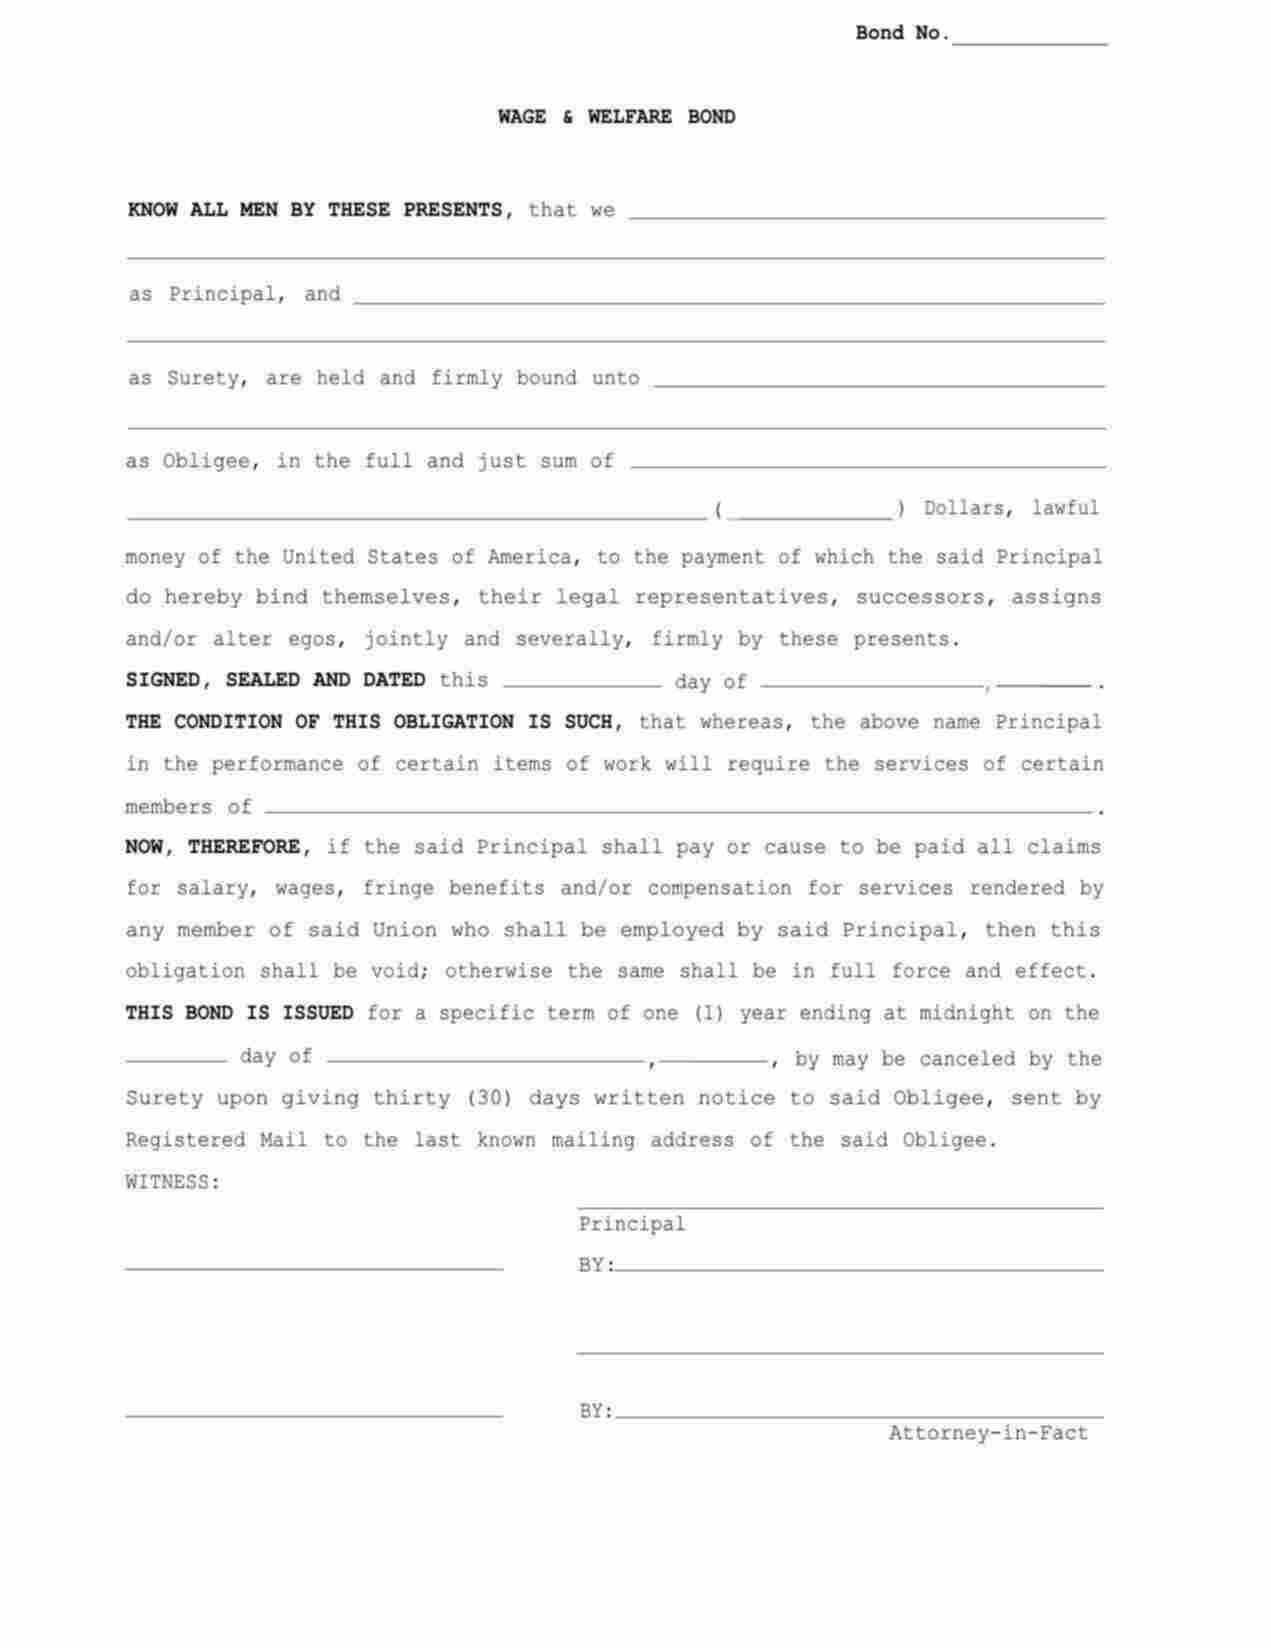 Tennessee Wage and Welfare Bond Form